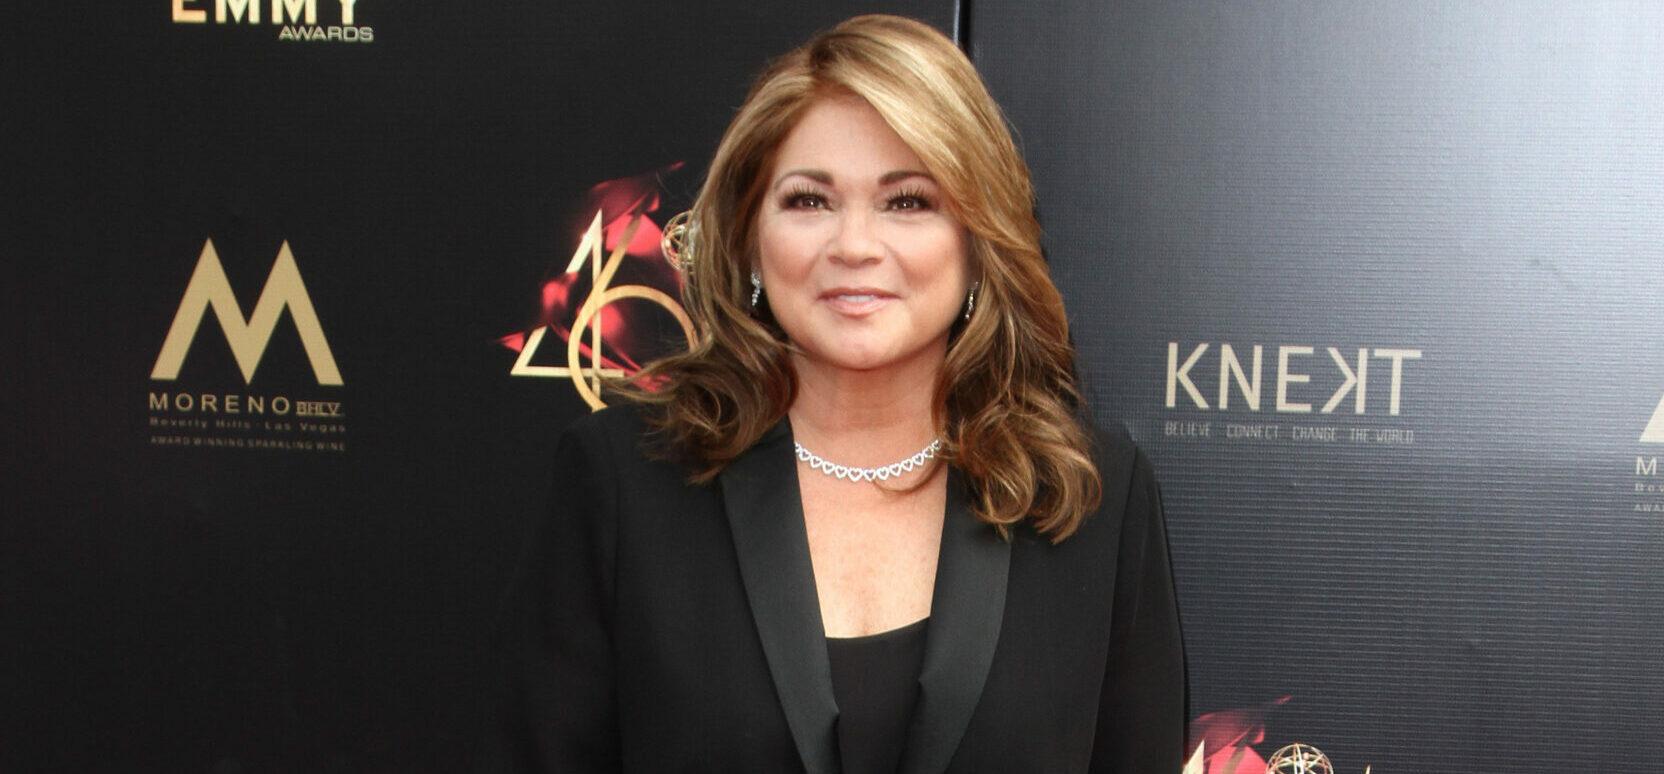 Valerie Bertinelli Spreads Awareness About Emotional And Mental Abuse